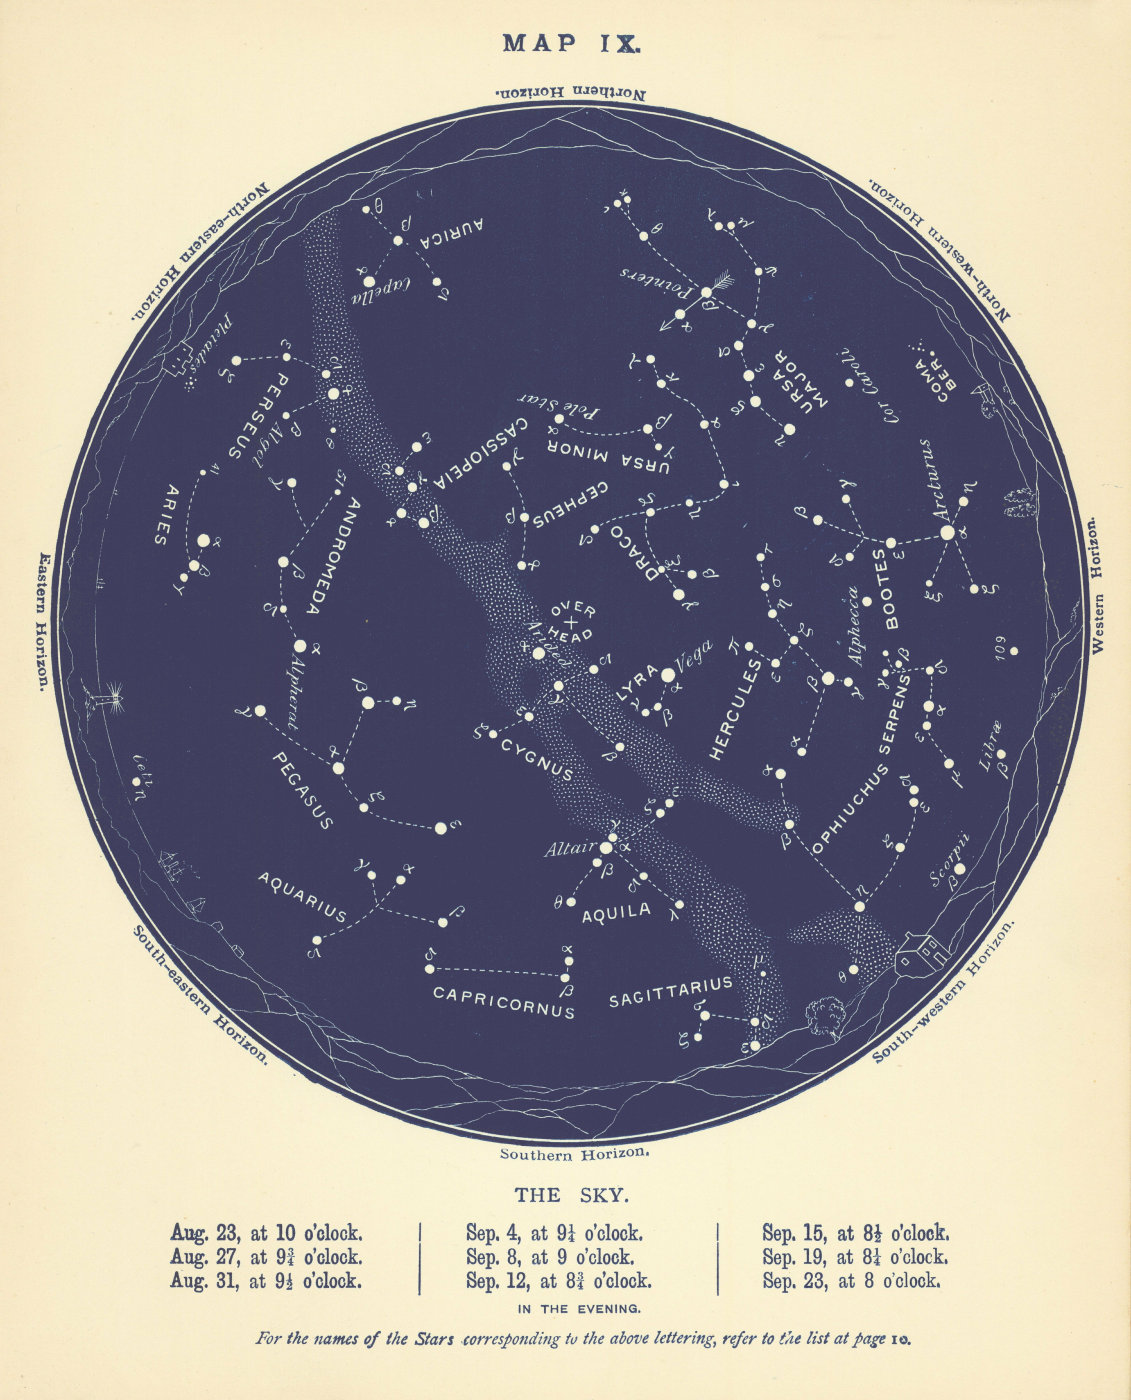 Associate Product STAR MAP IX. The Night Sky. August-September. Astronomy. PROCTOR 1896 old